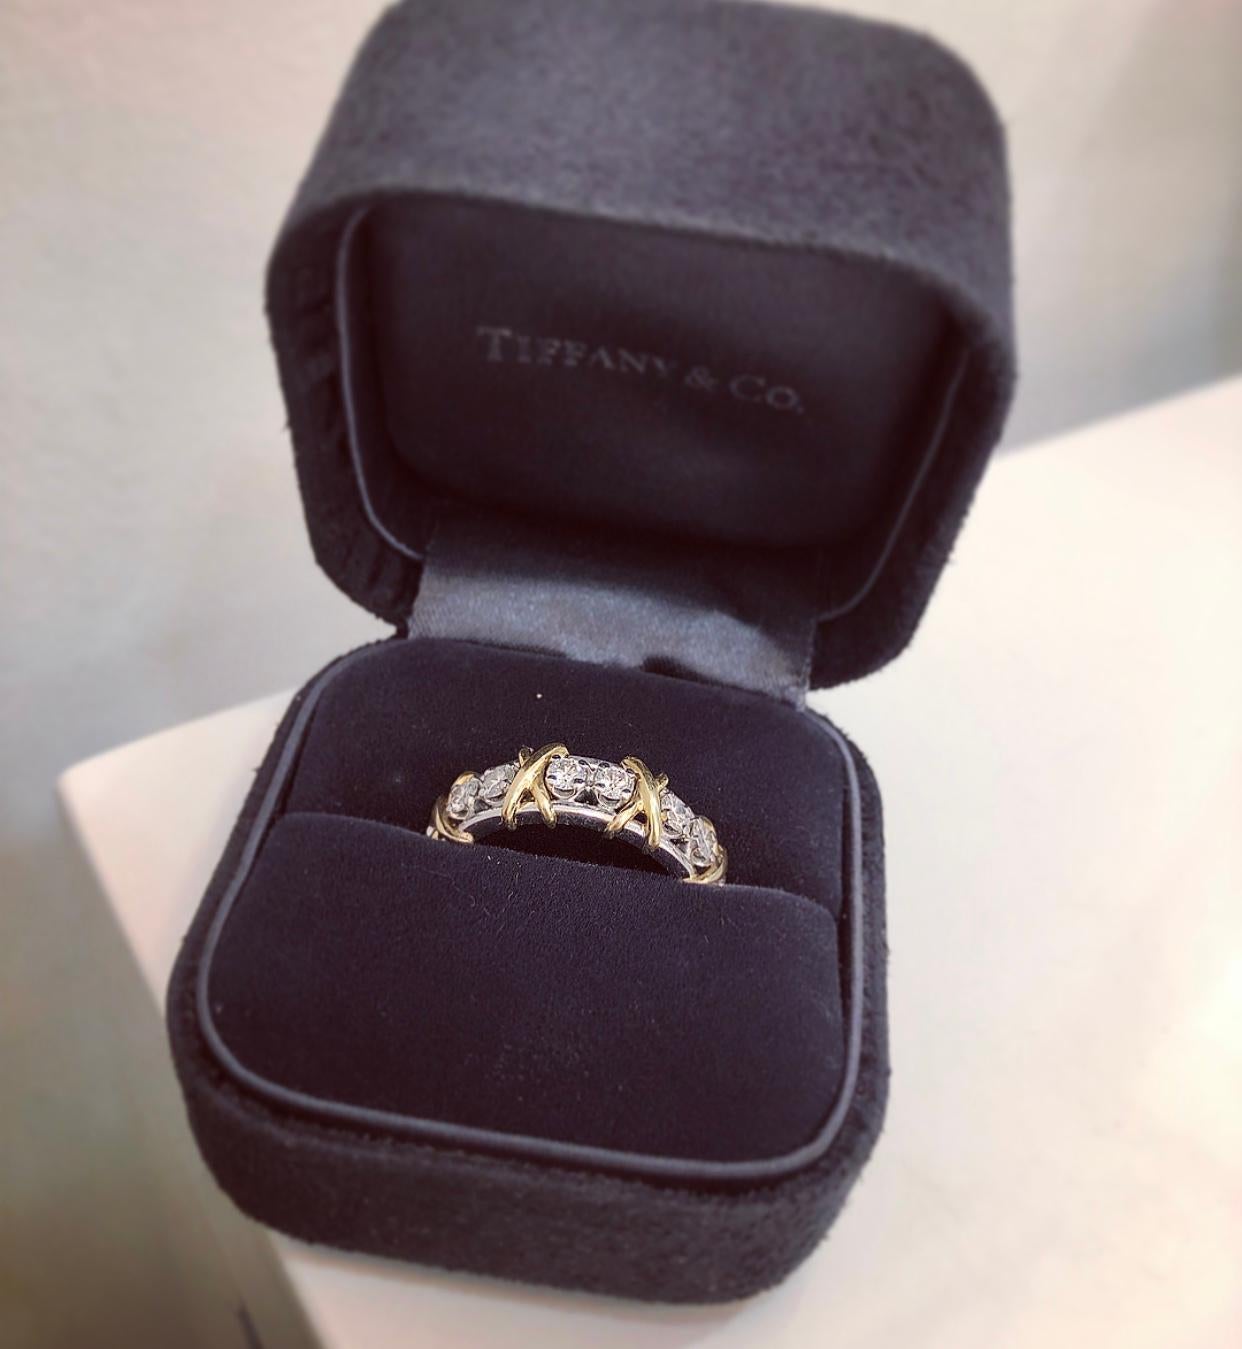 Tiffany & Co. Schlumberger Eternity Ring with Diamonds 3